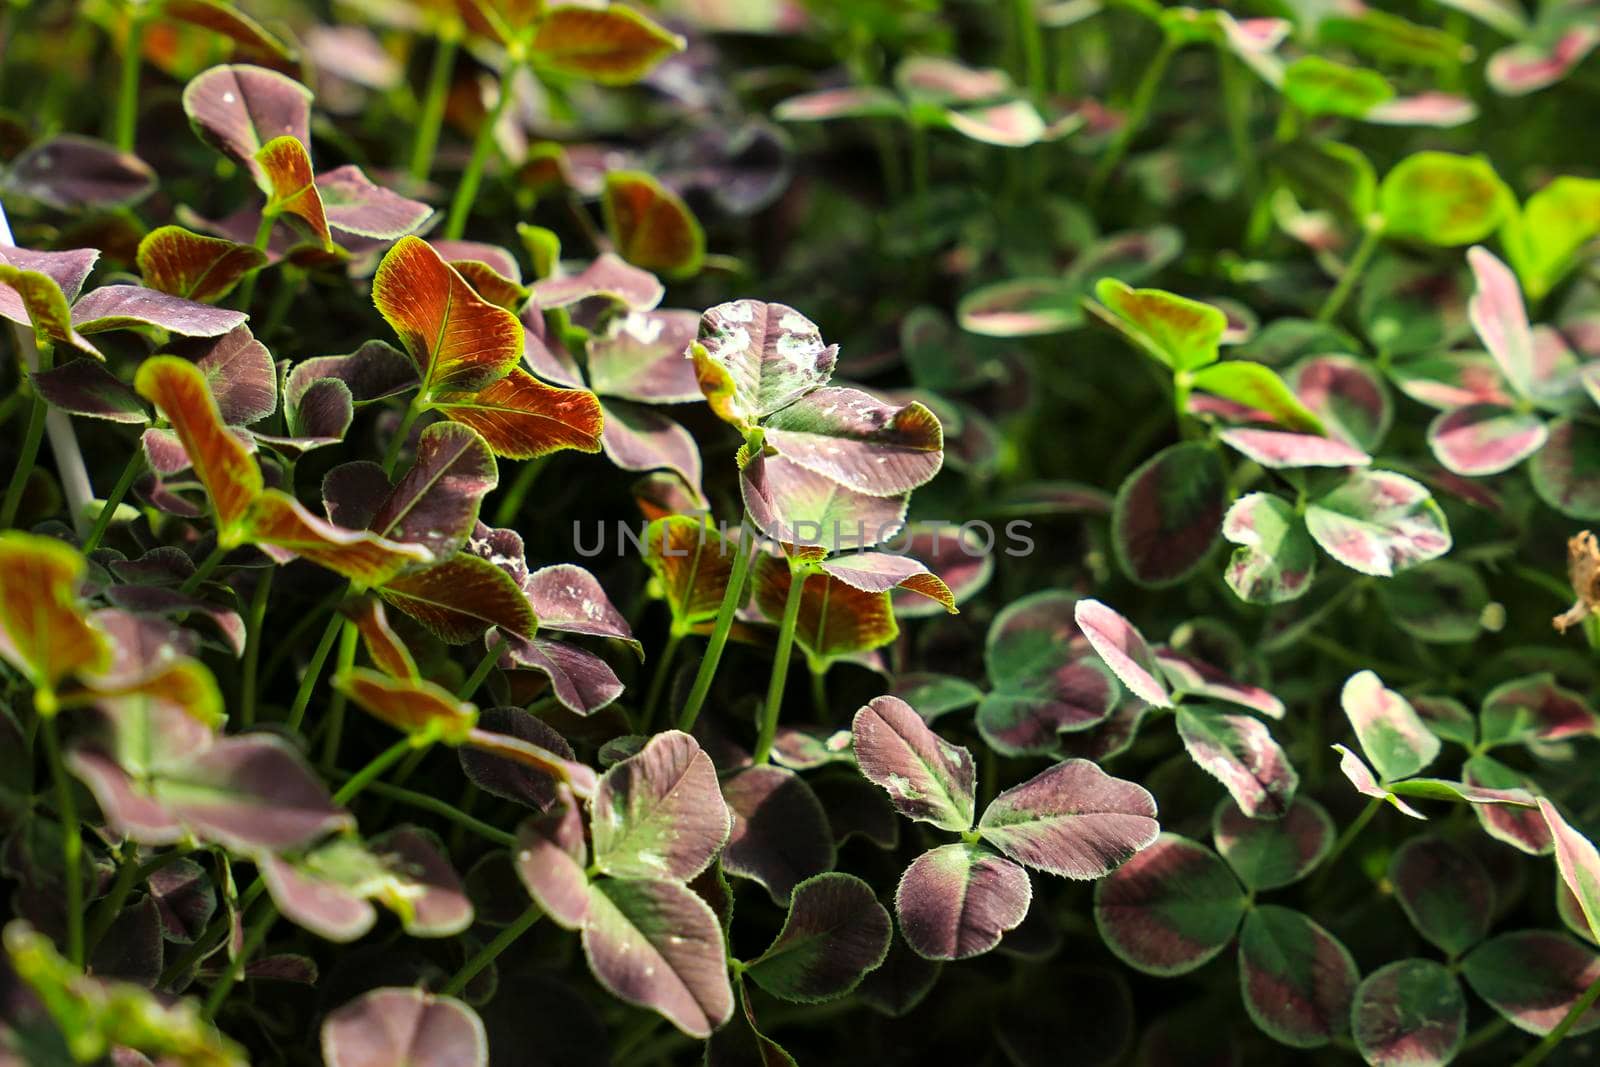 Colorful Oxalis plants, clovers, under the sun in the garden